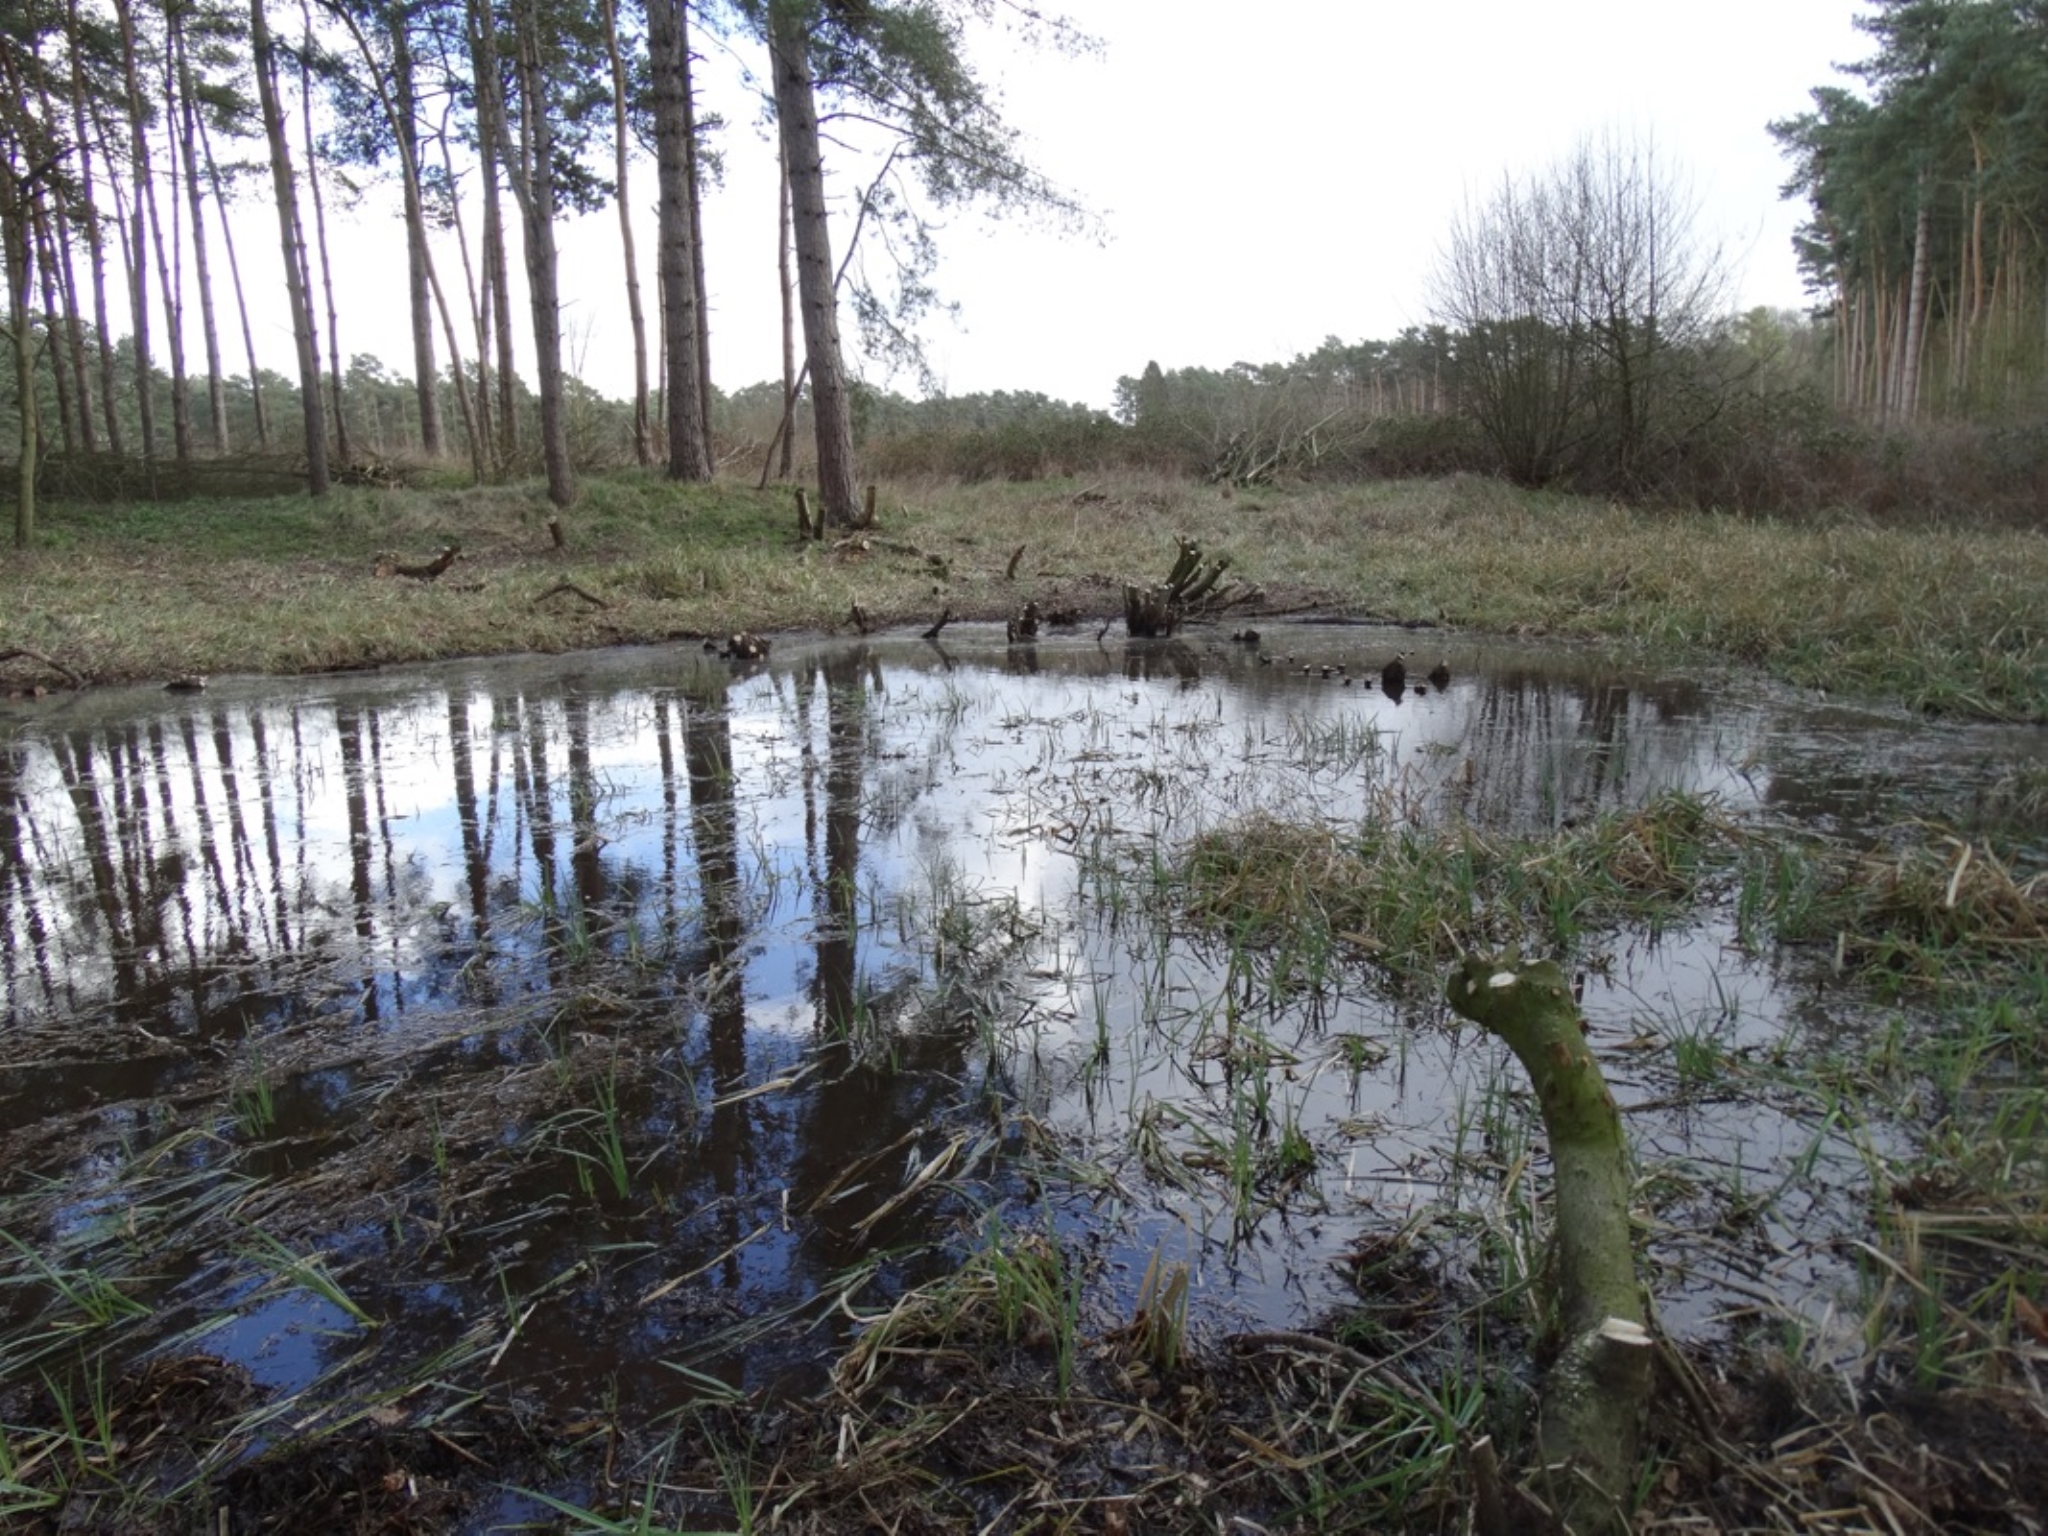 A photo from the FoTF Conservation Event - March 2019 - Clearance work around, and in, the ponds at Harling Woods, Harling : A photo of one of the ponds at Harling Woods